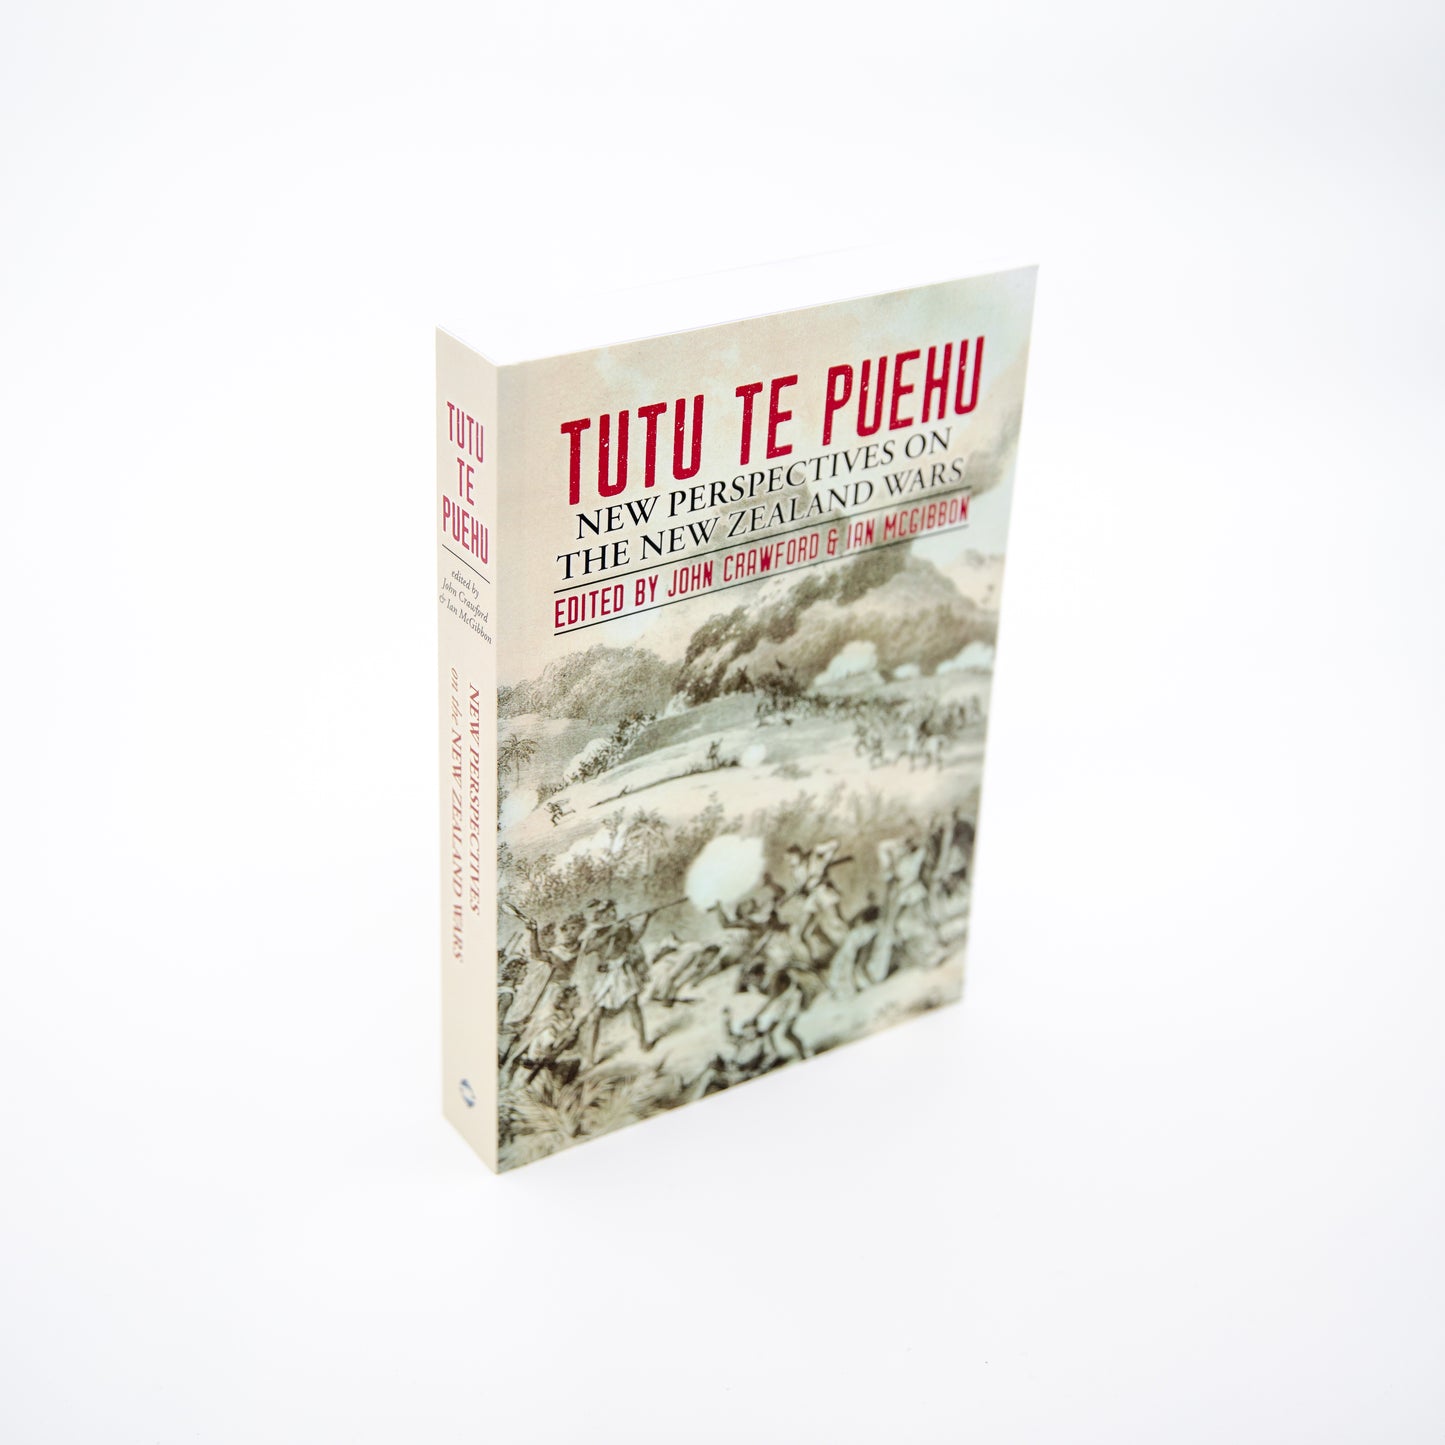 TUTU TE PUEHU - New perspectives on the NZ wars